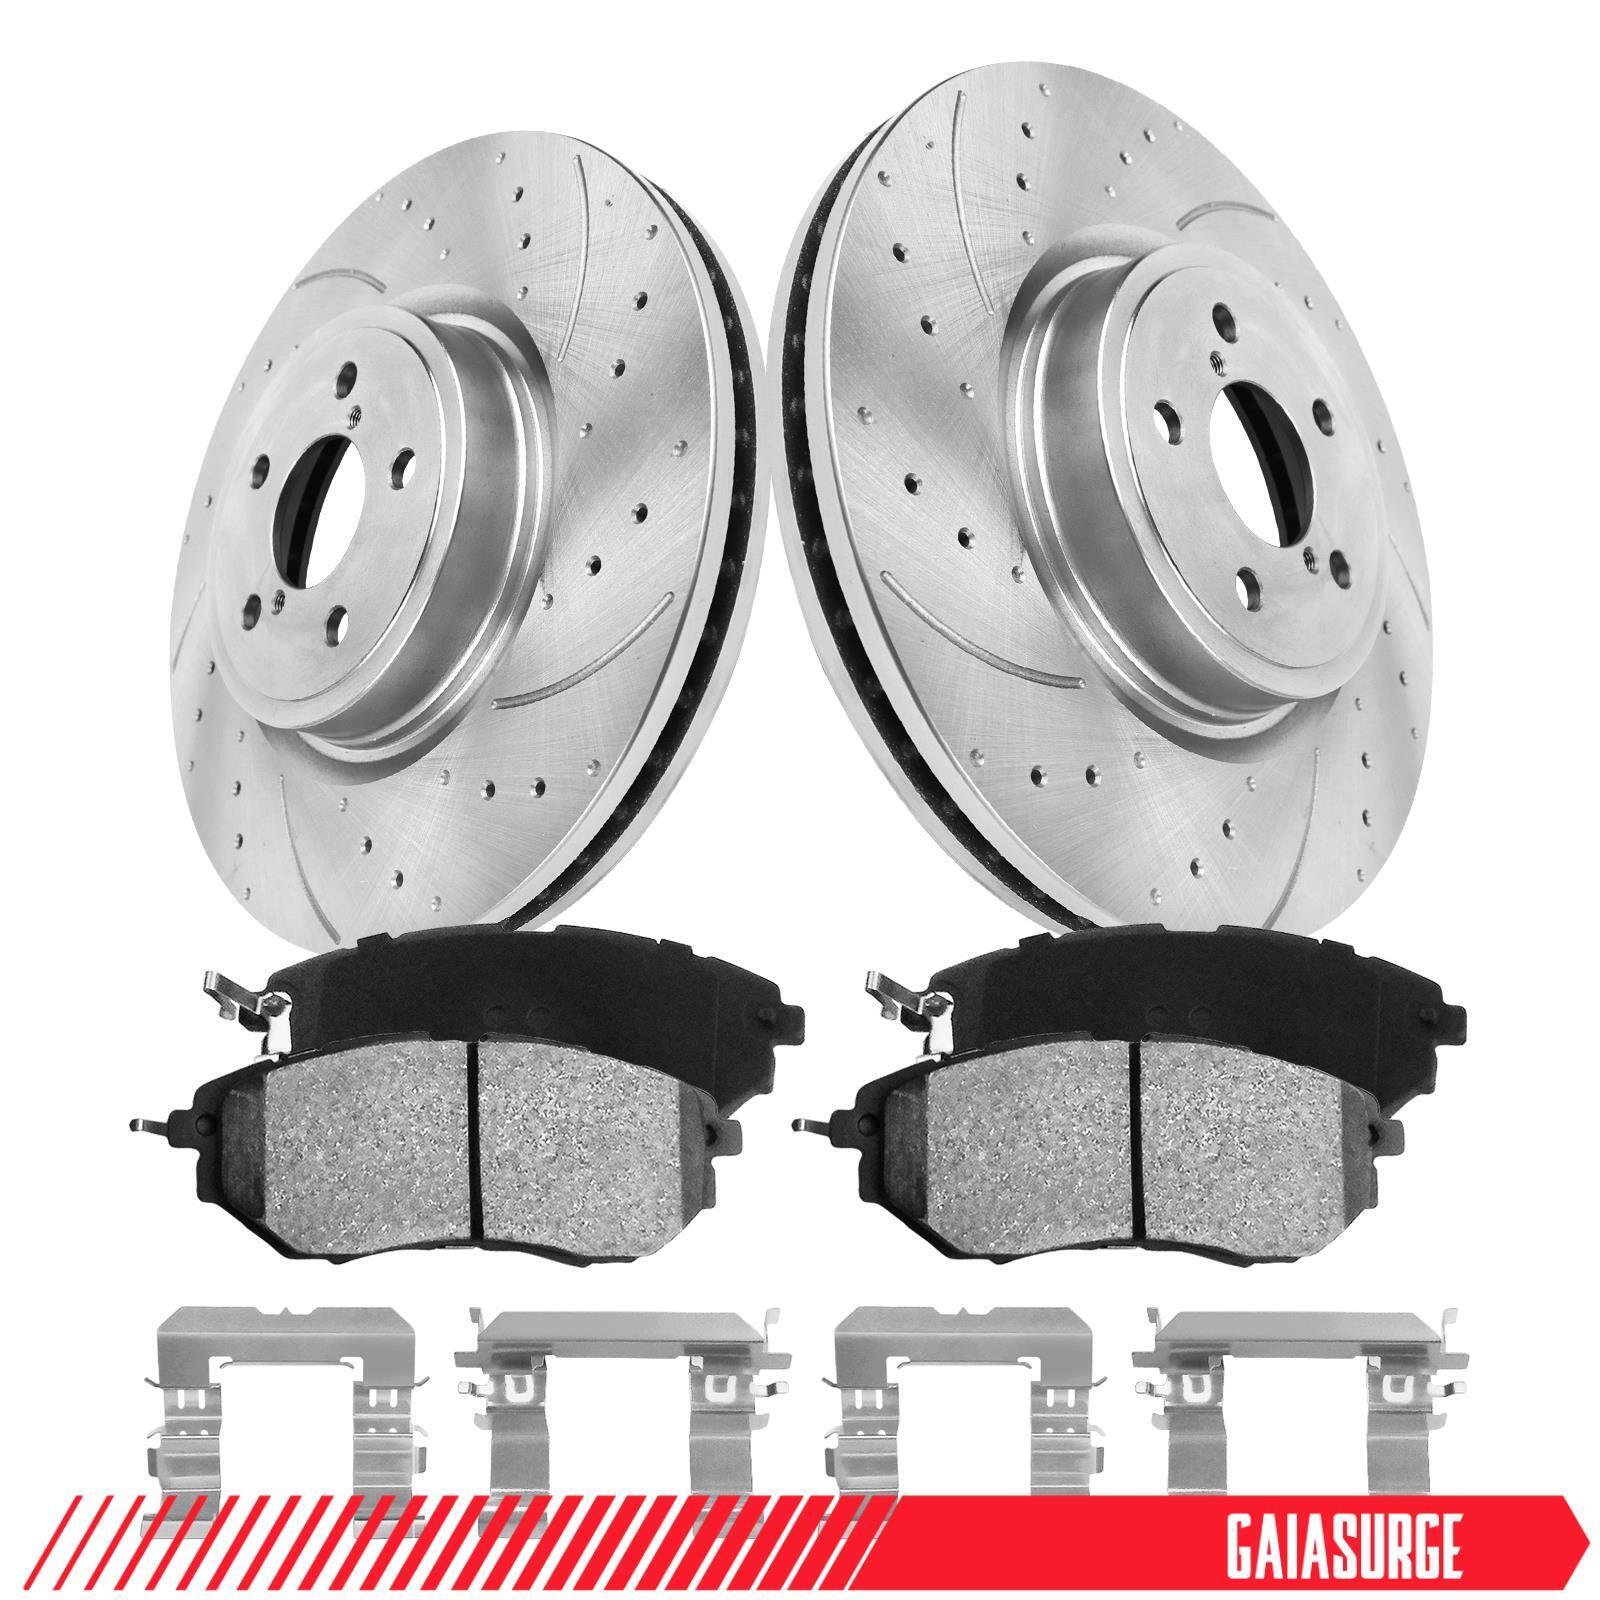 316MM Front Disc Brake Rotors + Ceramic Pads for Subaru Forester Legacy Outback